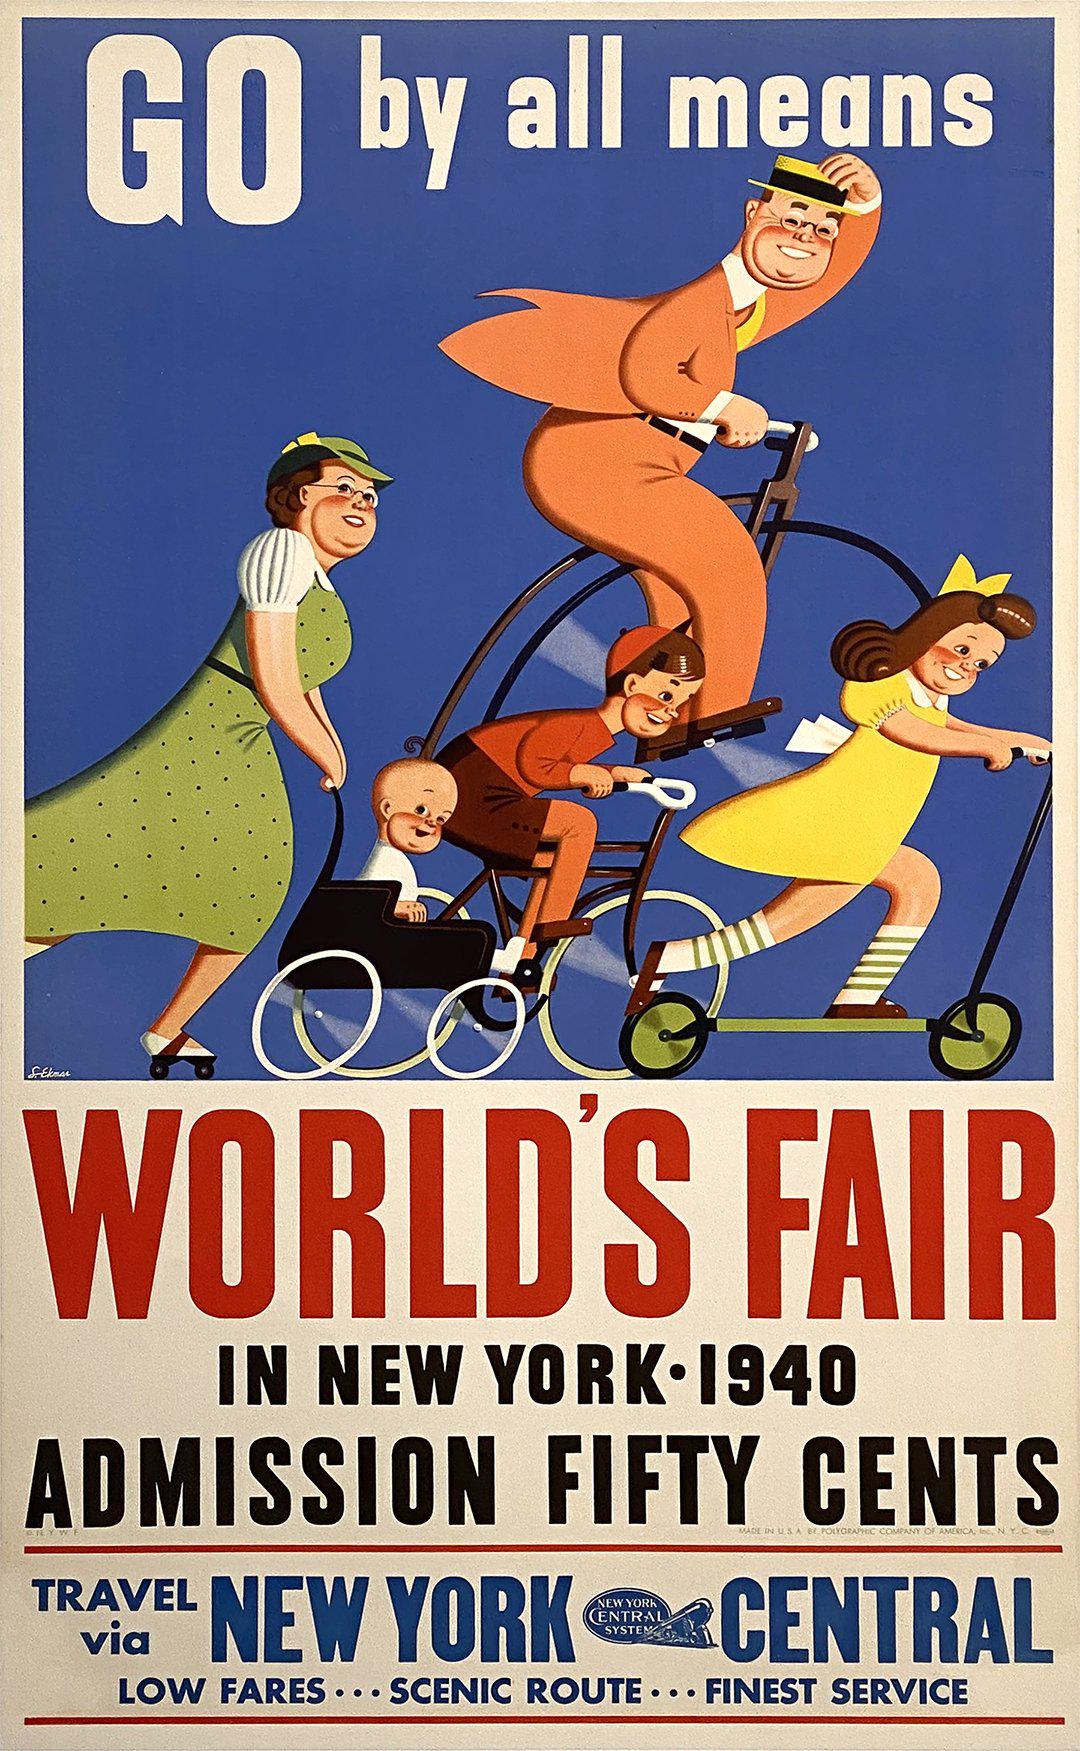 Original World's Fair in New York 1940 Poster by Stanley Ekman - Go by All Means New York Central